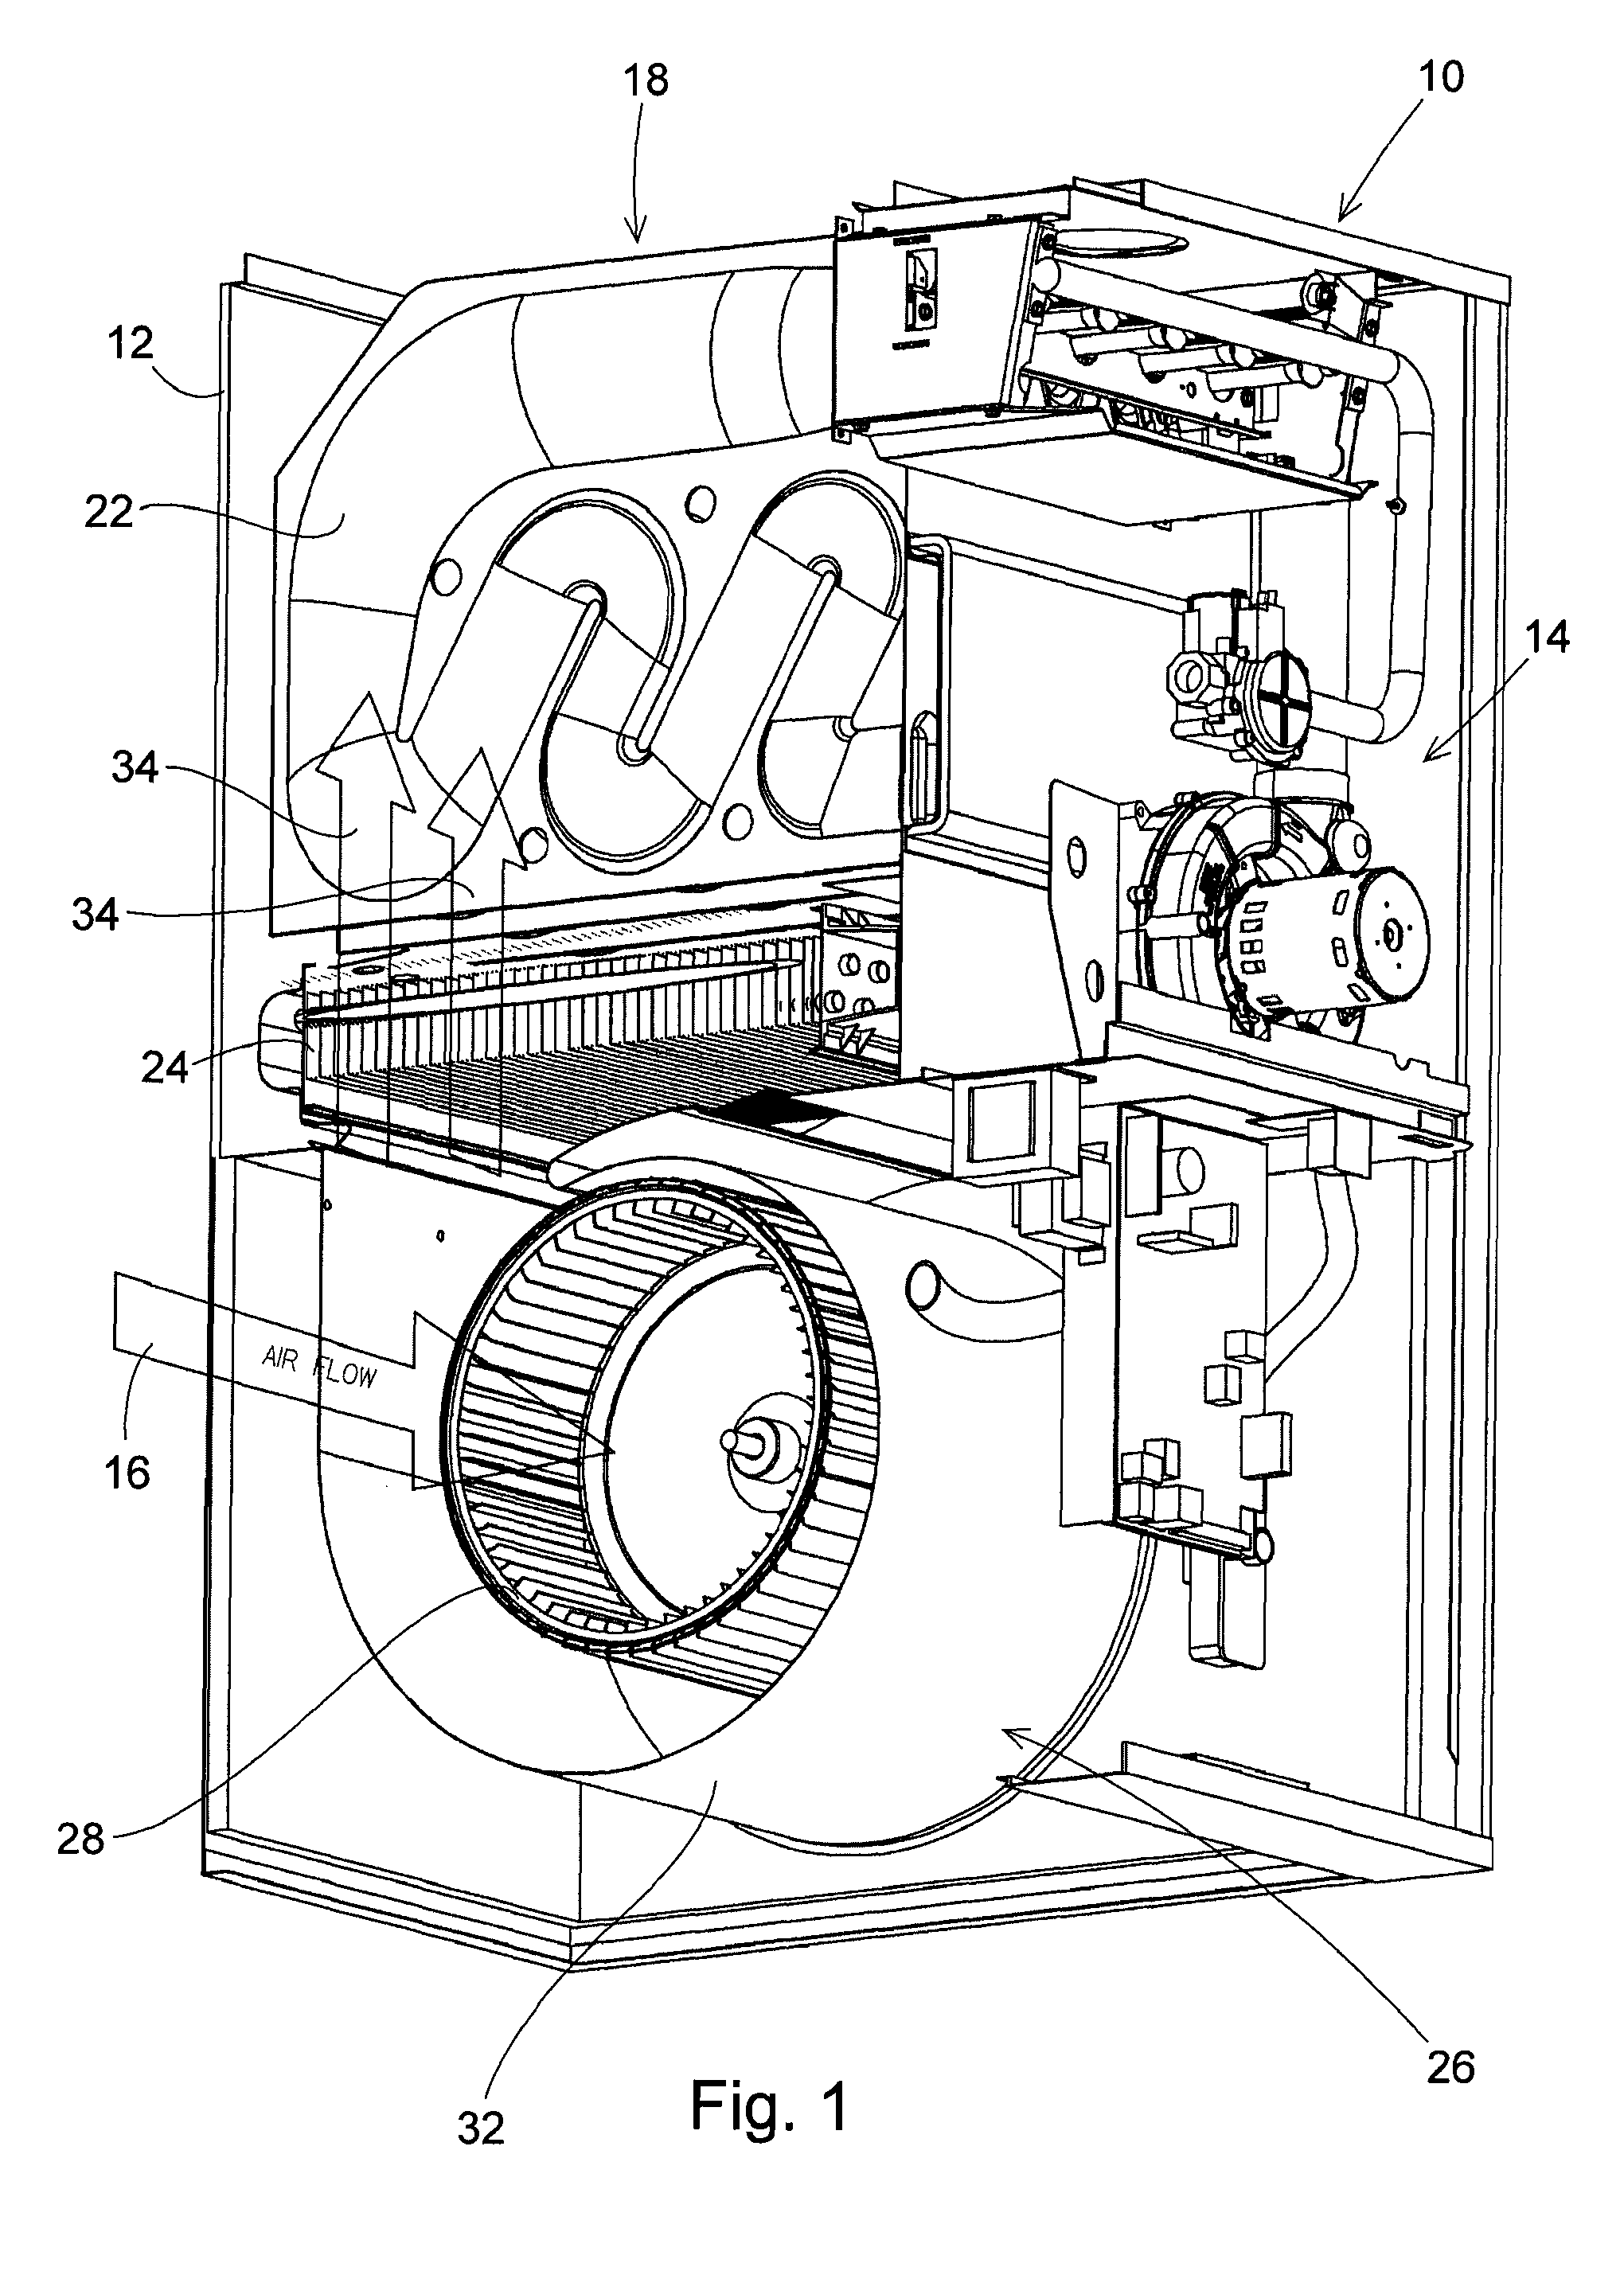 High efficiency furnace having a blower housing with an enlarged air outlet opening